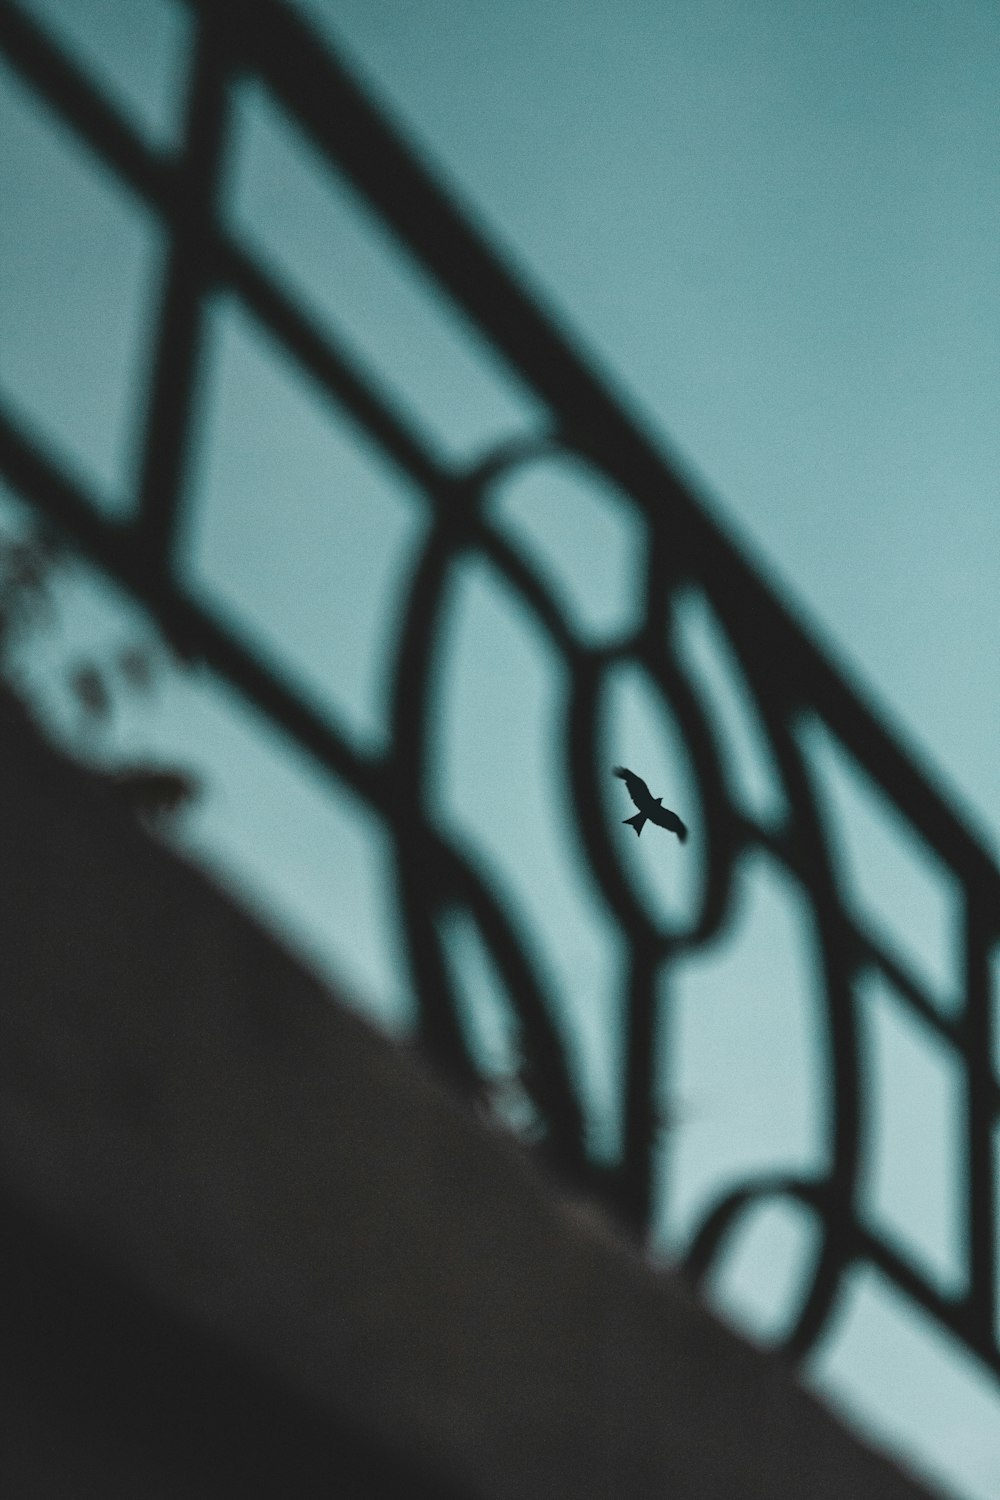 a bird flying in the sky over a railing